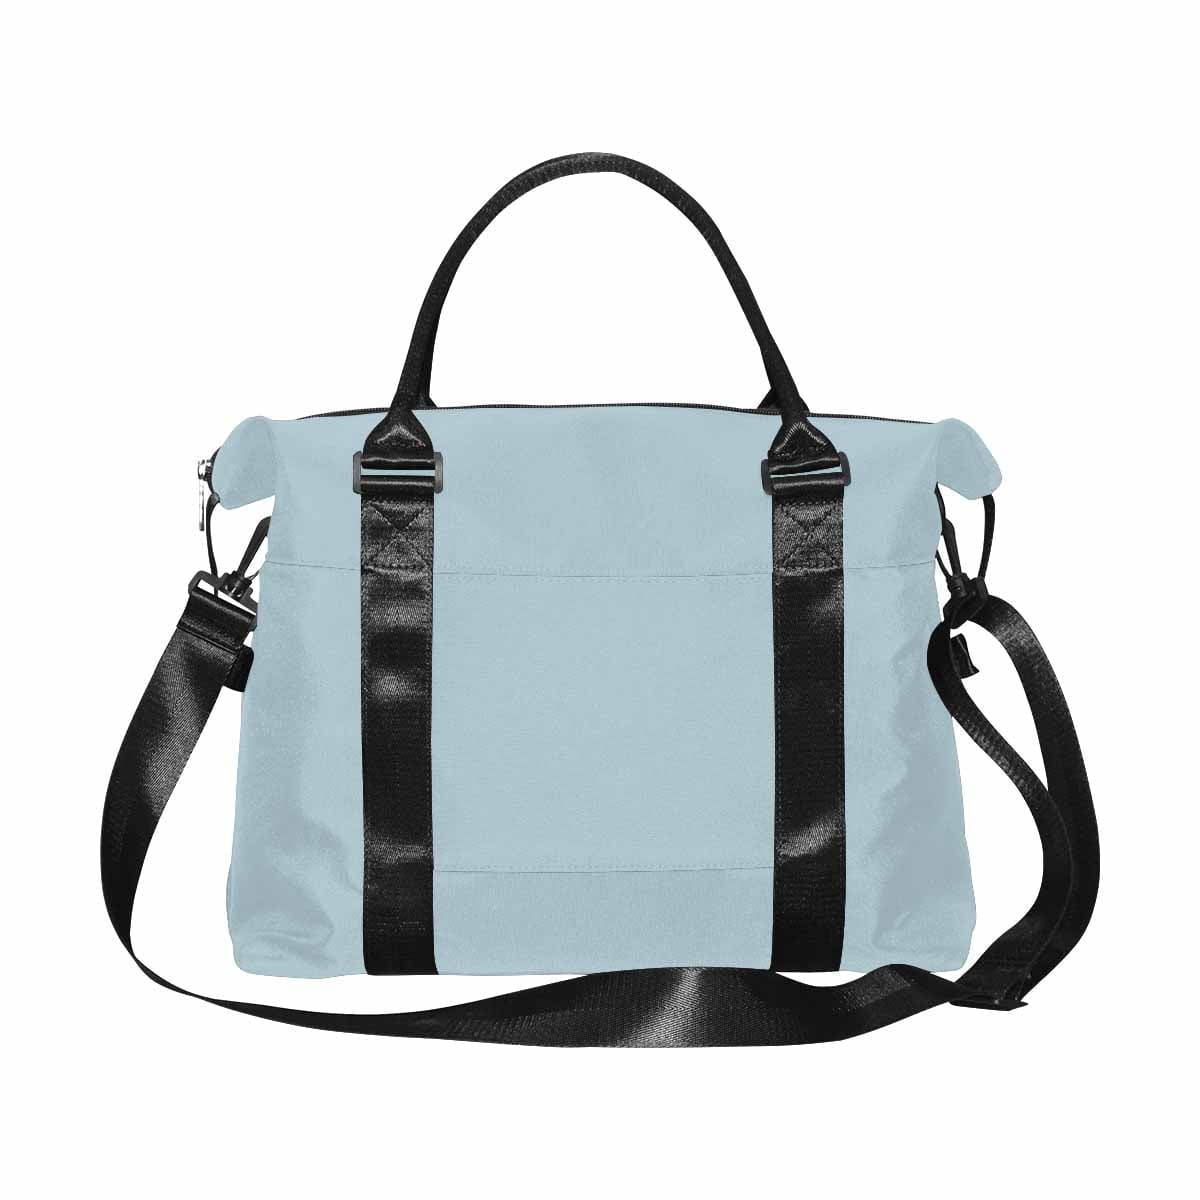 Travel Bag Pastel Blue Canvas Carry On - Bags | Travel Bags | Canvas Carry